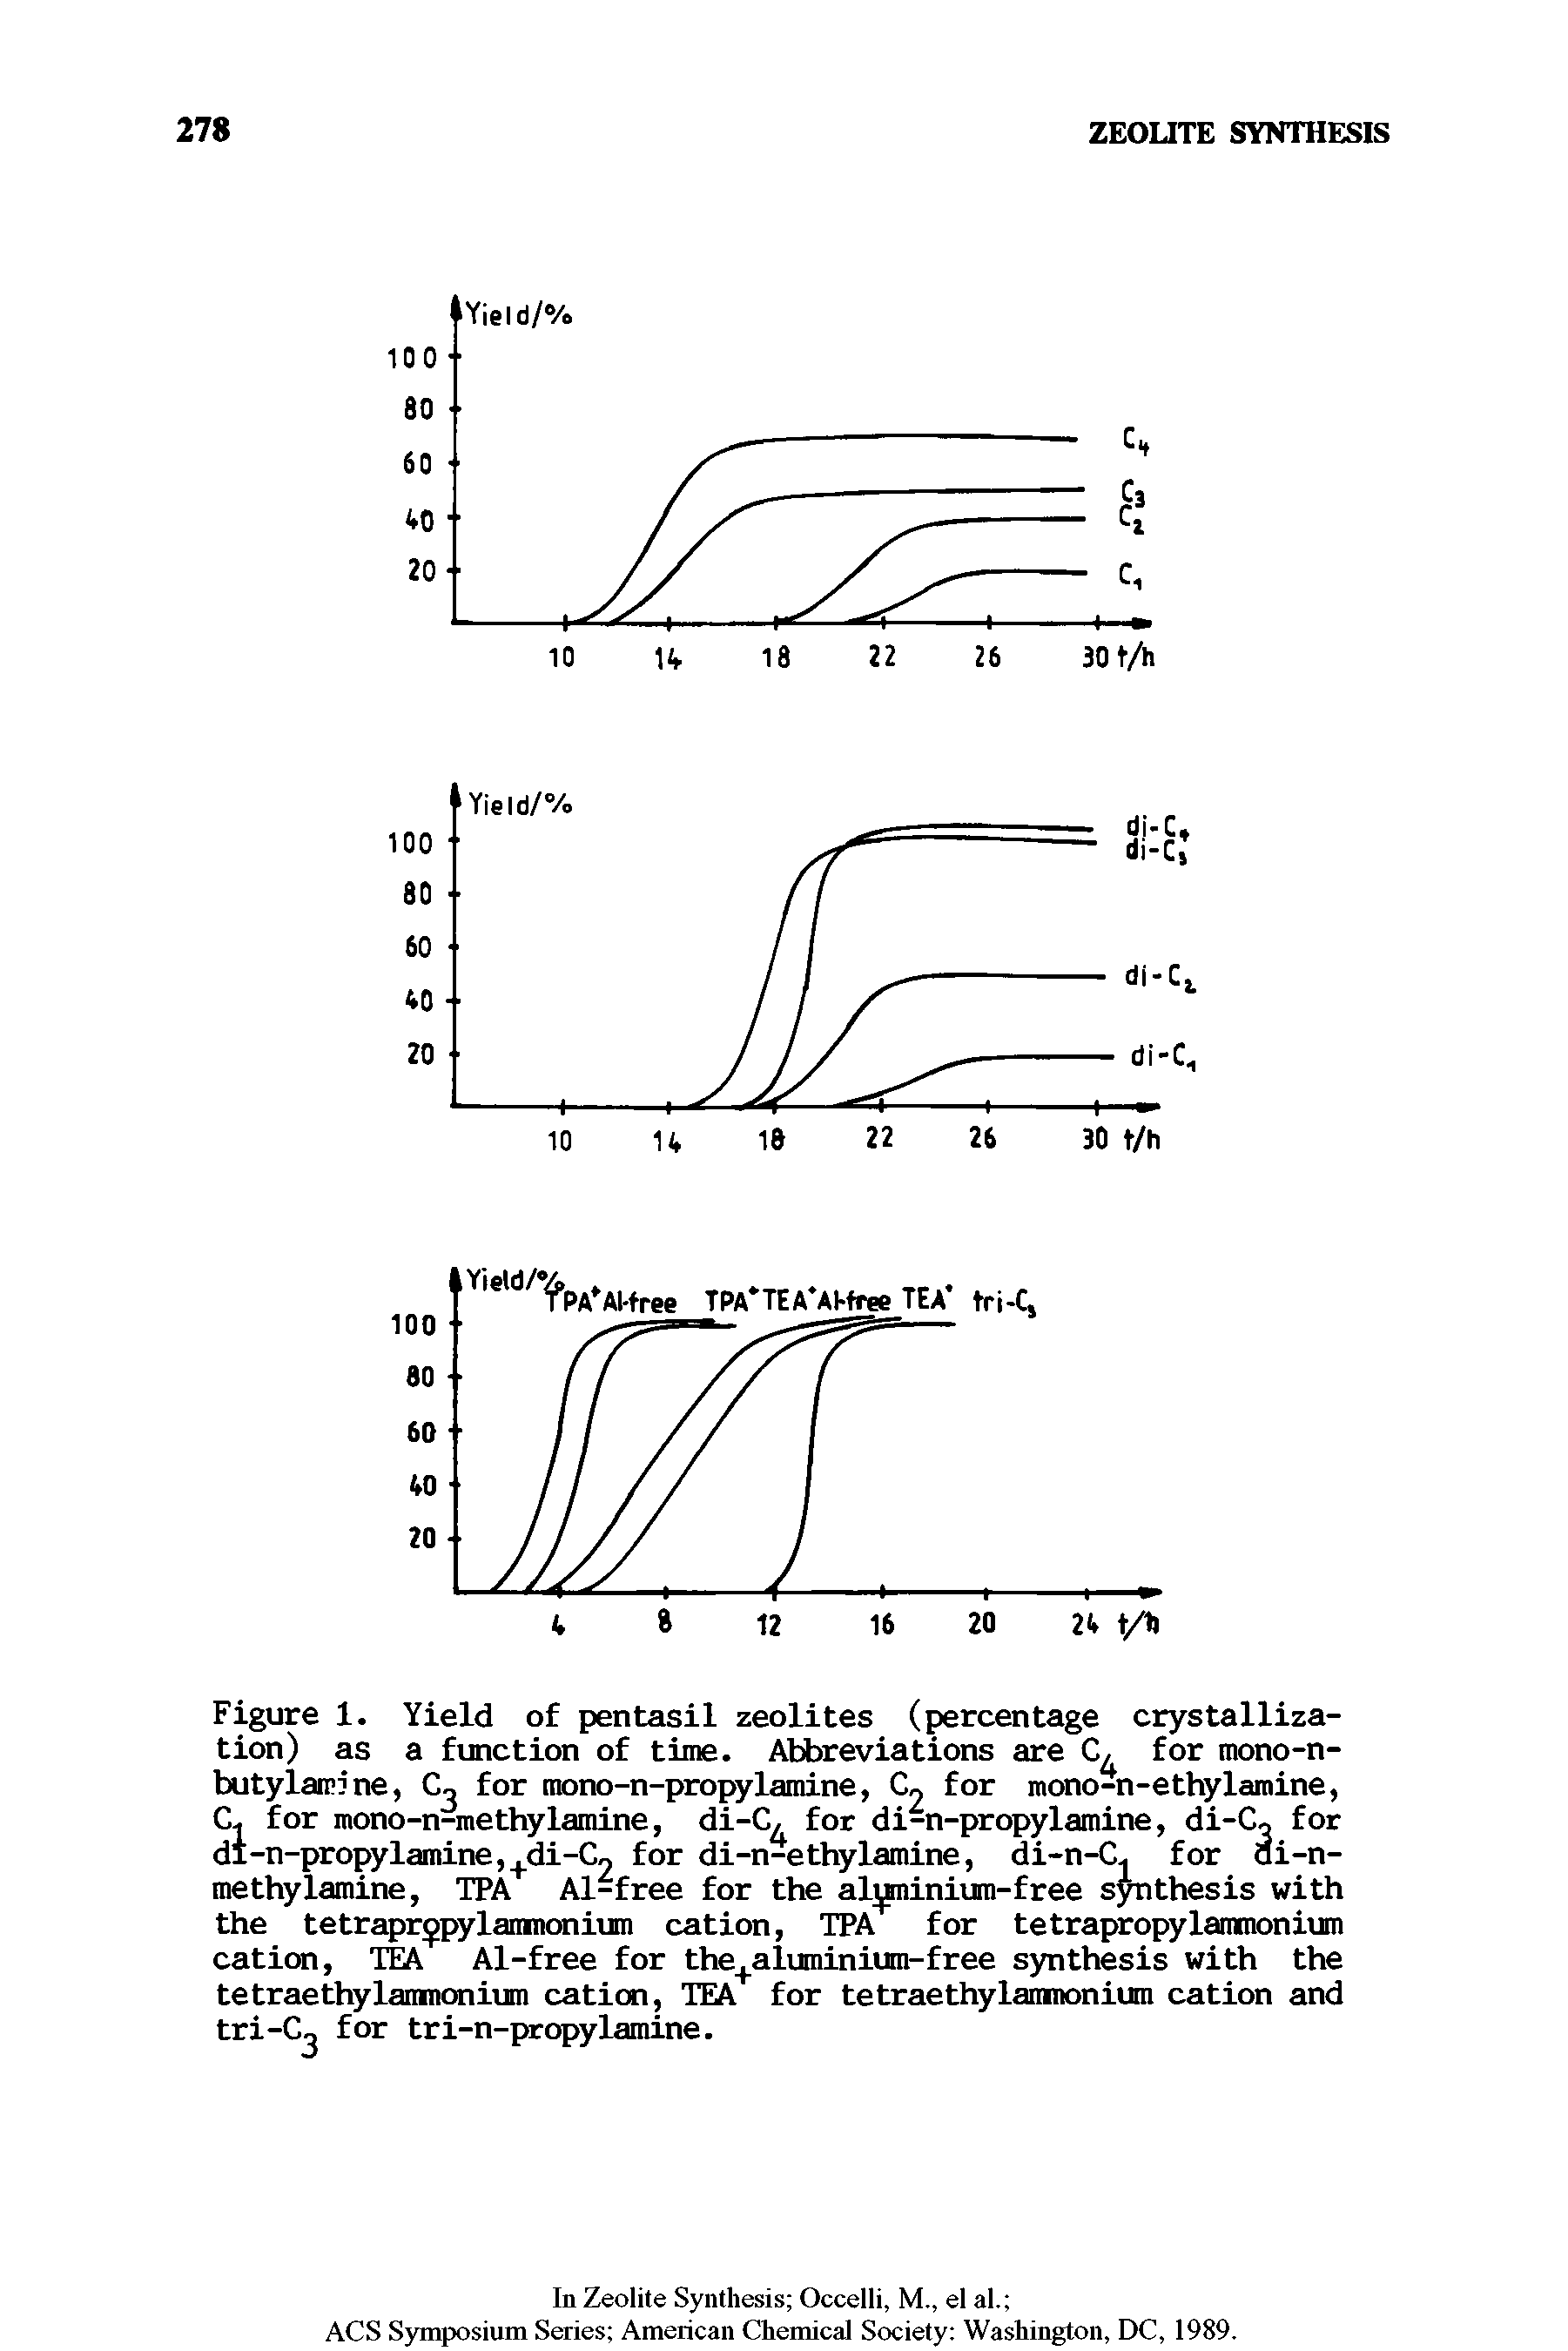 Figure 1. Yield of pentasil zeolites (percentage crystallization) as a function of time. Abbreviations are C, for mono-n-butylair ne, CU for mono-n-propylamine, C2 for mono-n-ethylamine, C. for mono-n-methylamine, di-C, for di-n-propylamine, di-C, for di-n-propylamine,+di-C2 for di-n-ethylamine, di-n-C.. for di-n-methylamine, TPA Al-free for the aluminium-free synthesis with the tetrapr pylammonium cation, TPA for tetrapropylammonium cation, TEA Al-free for the+aluminium-free synthesis with the tetraethylammonium cation, TEA for tetraethylammonium cation and tri-C for tri-n-propylamine.